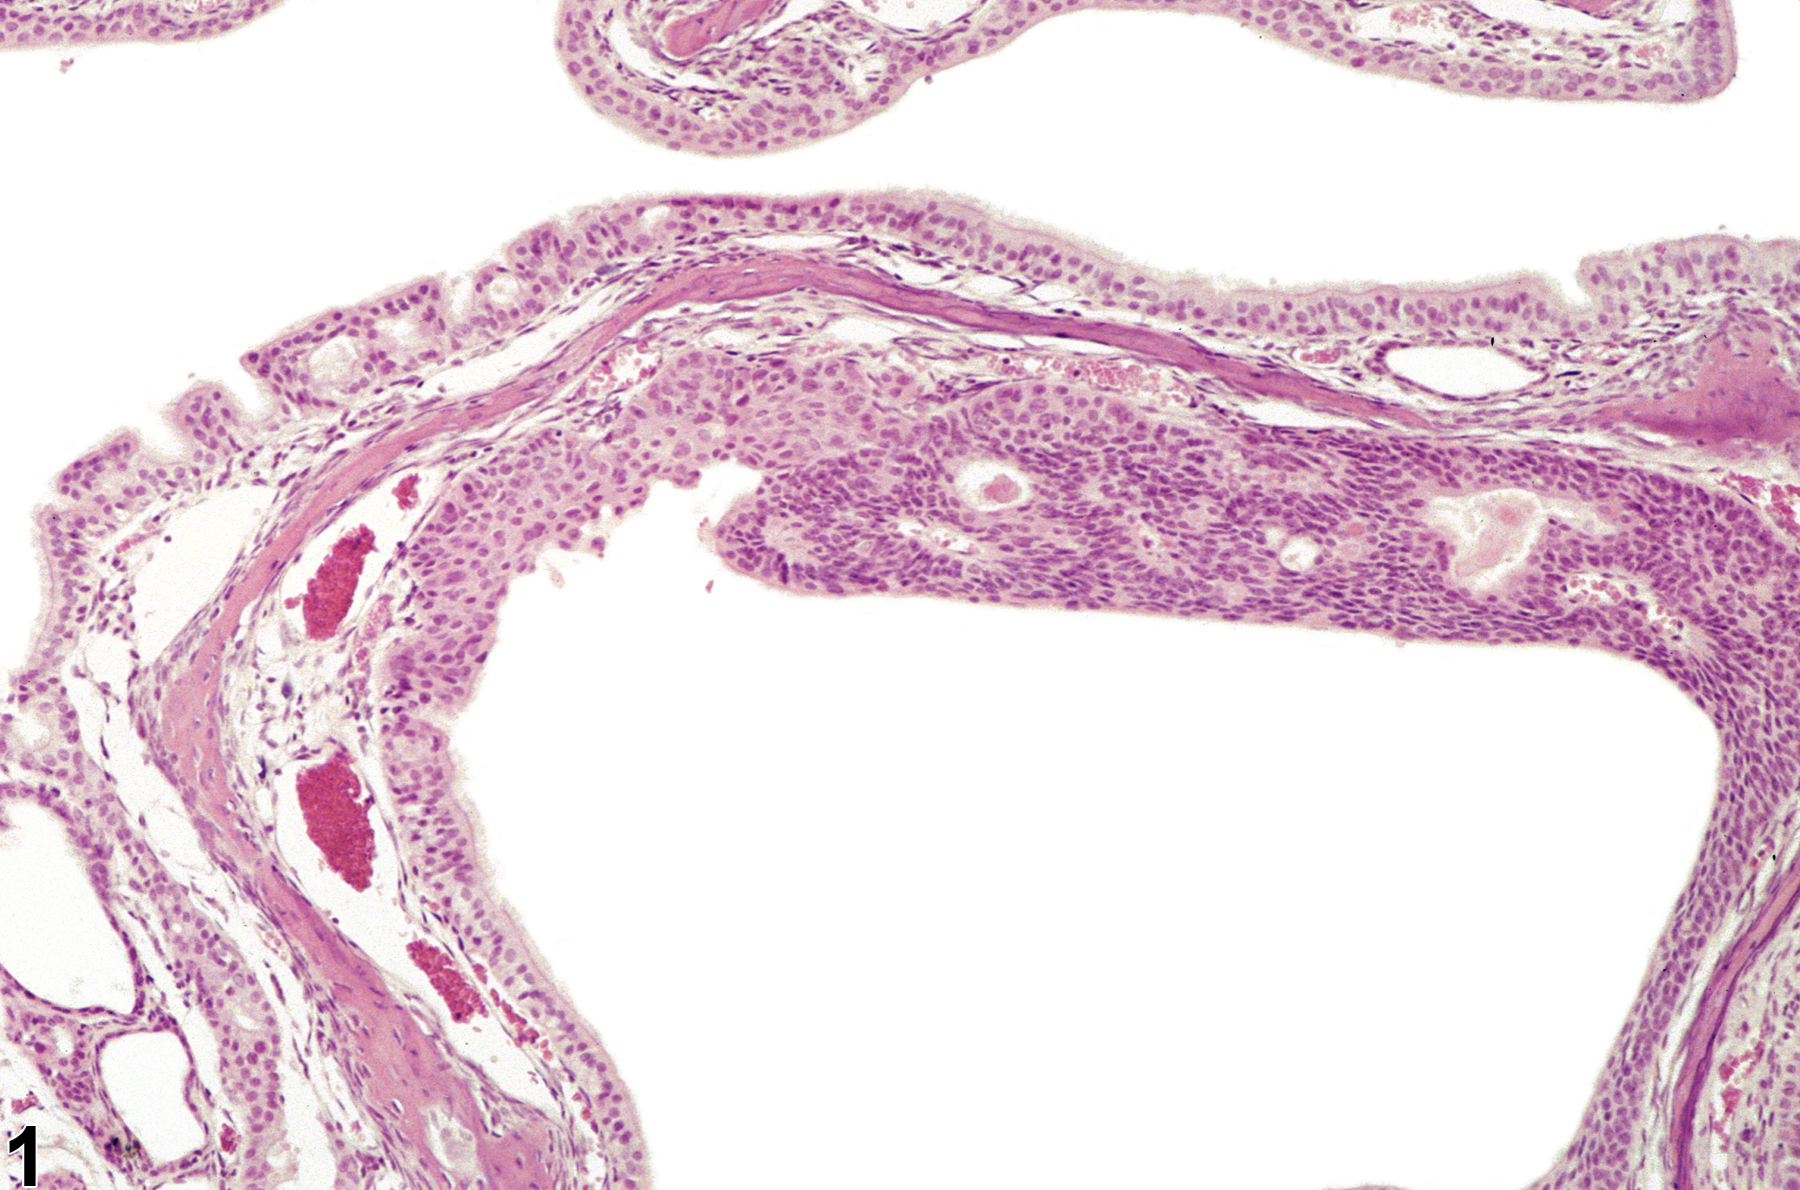 Image of hyperplasia, atypical in the nose, respiratory epithelium from a male B6C3F1/N mouse in a chronic study